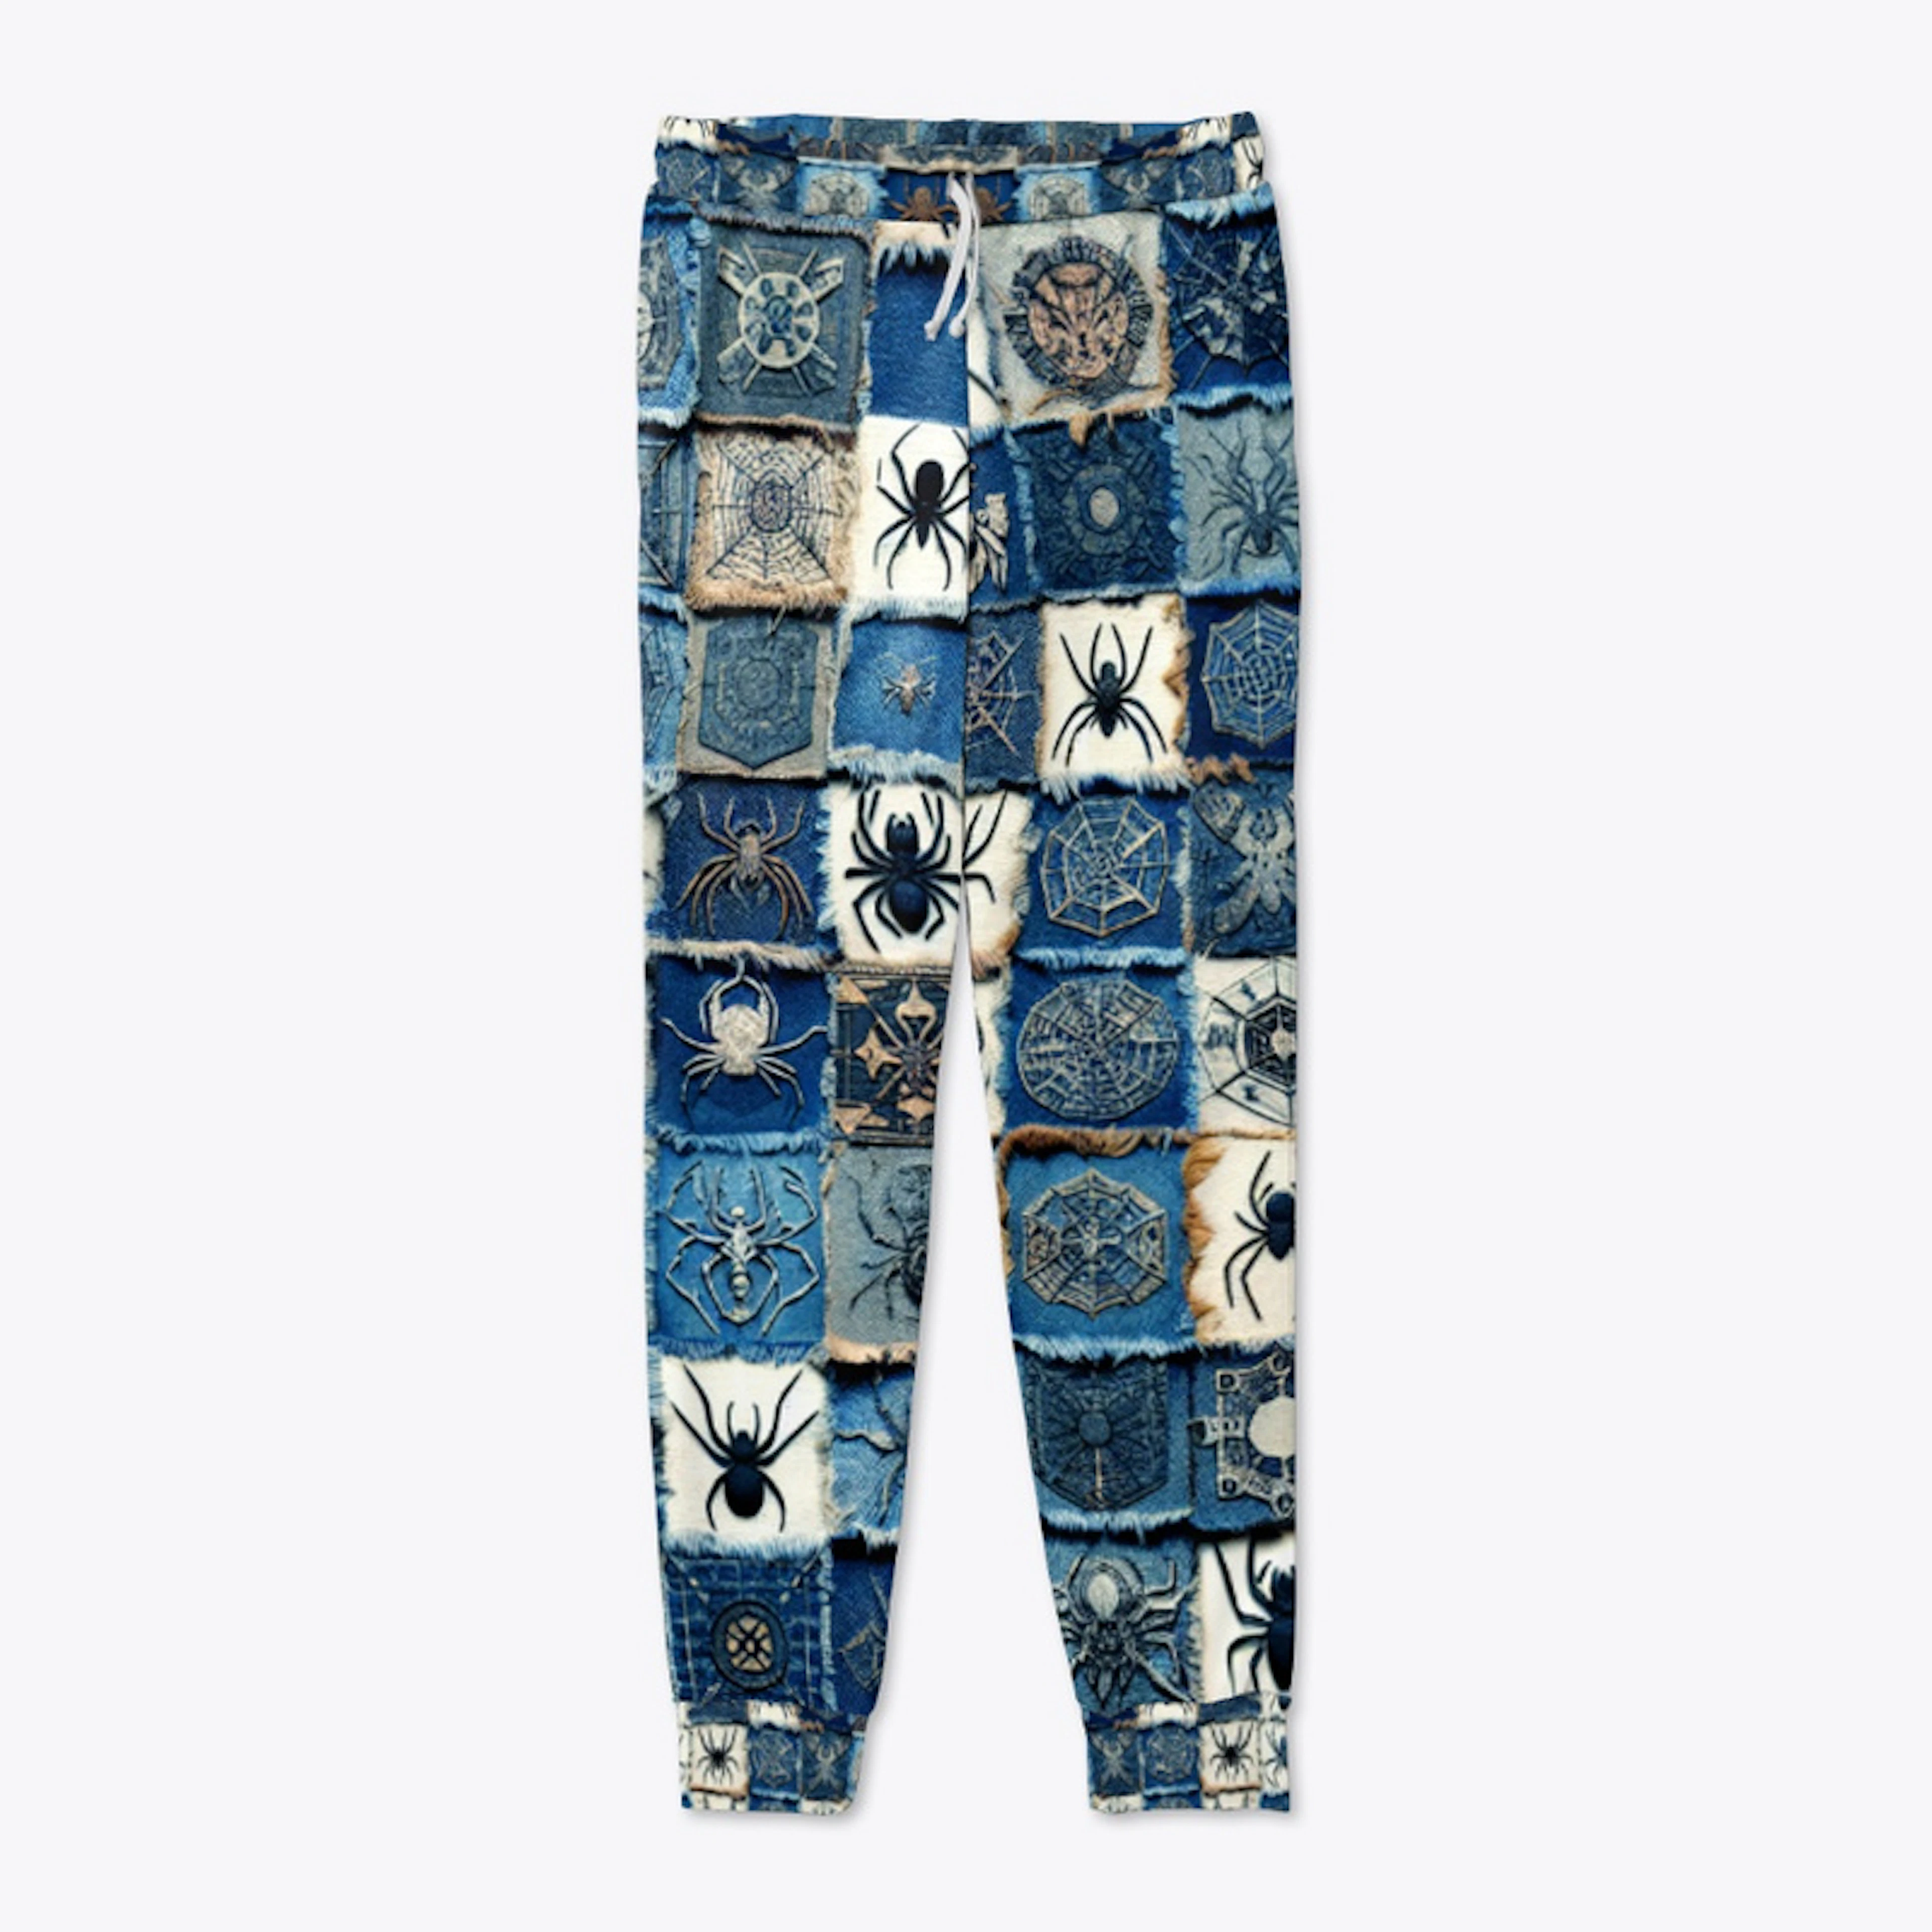 Spiders on jeans